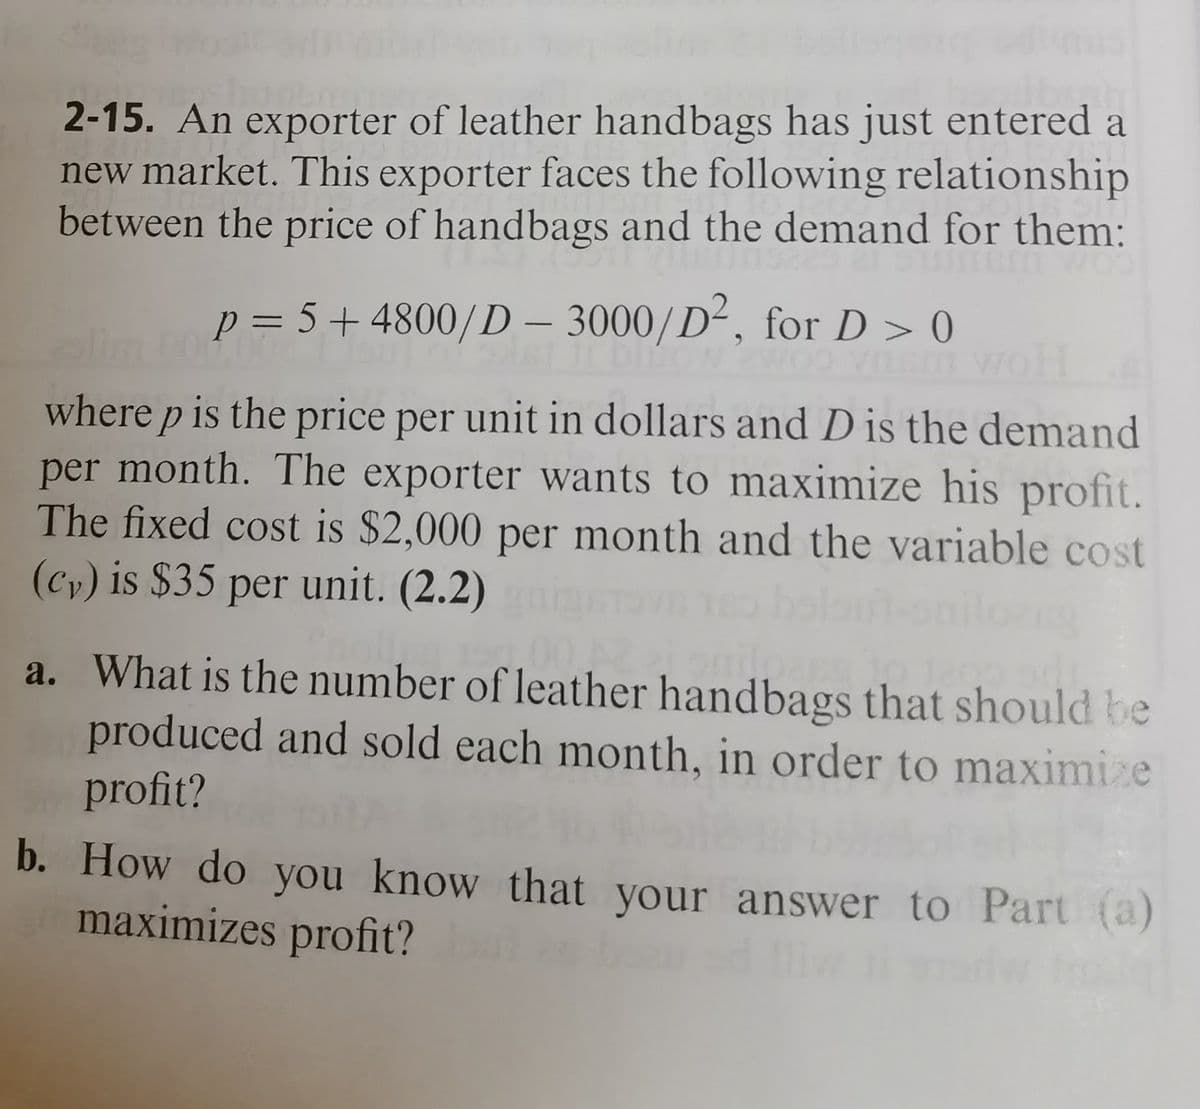 2-15. An exporter of leather handbags has just entered a
new market. This exporter faces the following relationship
between the price of handbags and the demand for them:
p = 5+4800/D – 3000/D², for D > 0
-
where p is the price per unit in dollars and D is the demand
per month. The exporter wants to maximize his profit.
The fixed cost is $2,000 per month and the variable cost
(cy) is $35 per unit. (2.2)
a. What is the number of leather handbags that should be
produced and sold each month, in order to maximize
profit?
b. How do you know that your answer to Part (a)
maximizes profit?
